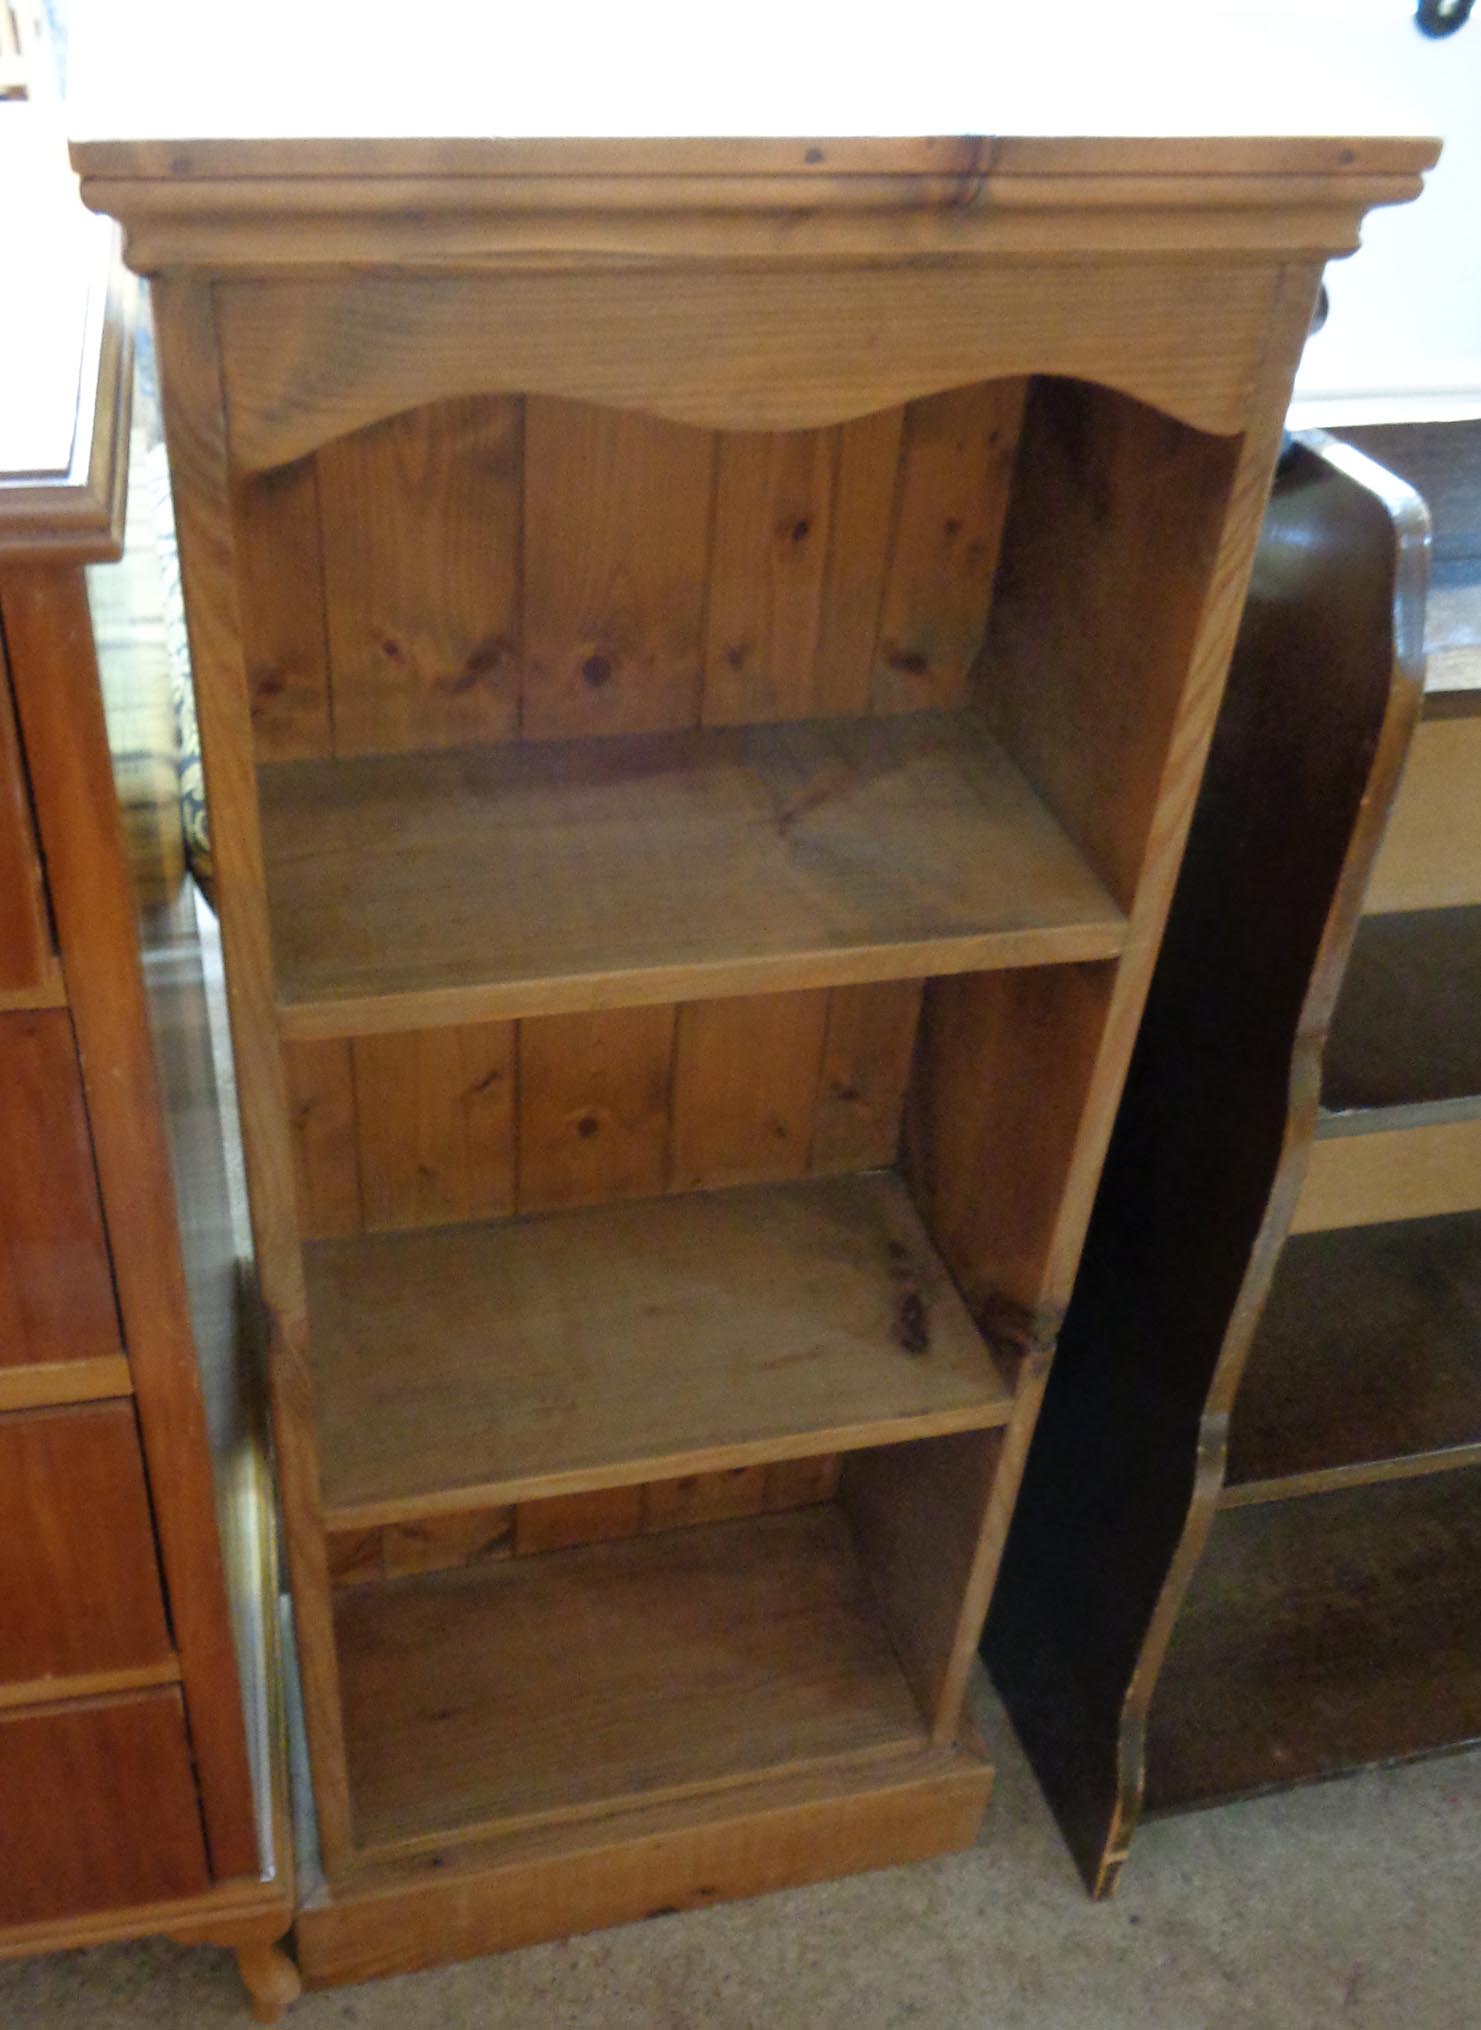 A 17 1/2" waxed pine three shelf open bookcase with plinth base